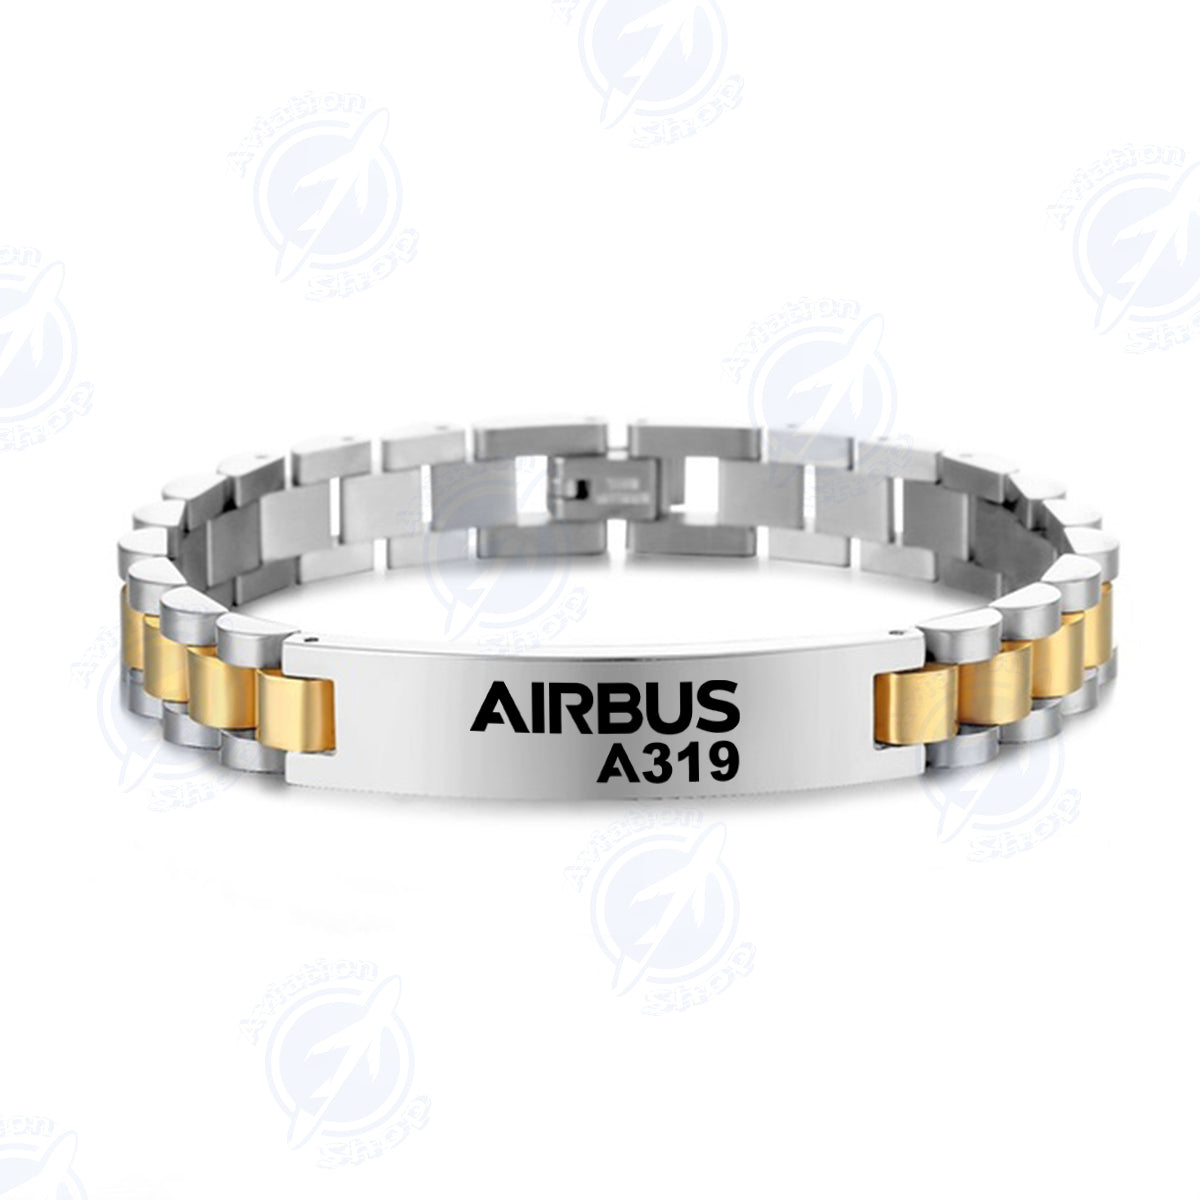 Airbus A319 & Text Designed Stainless Steel Chain Bracelets